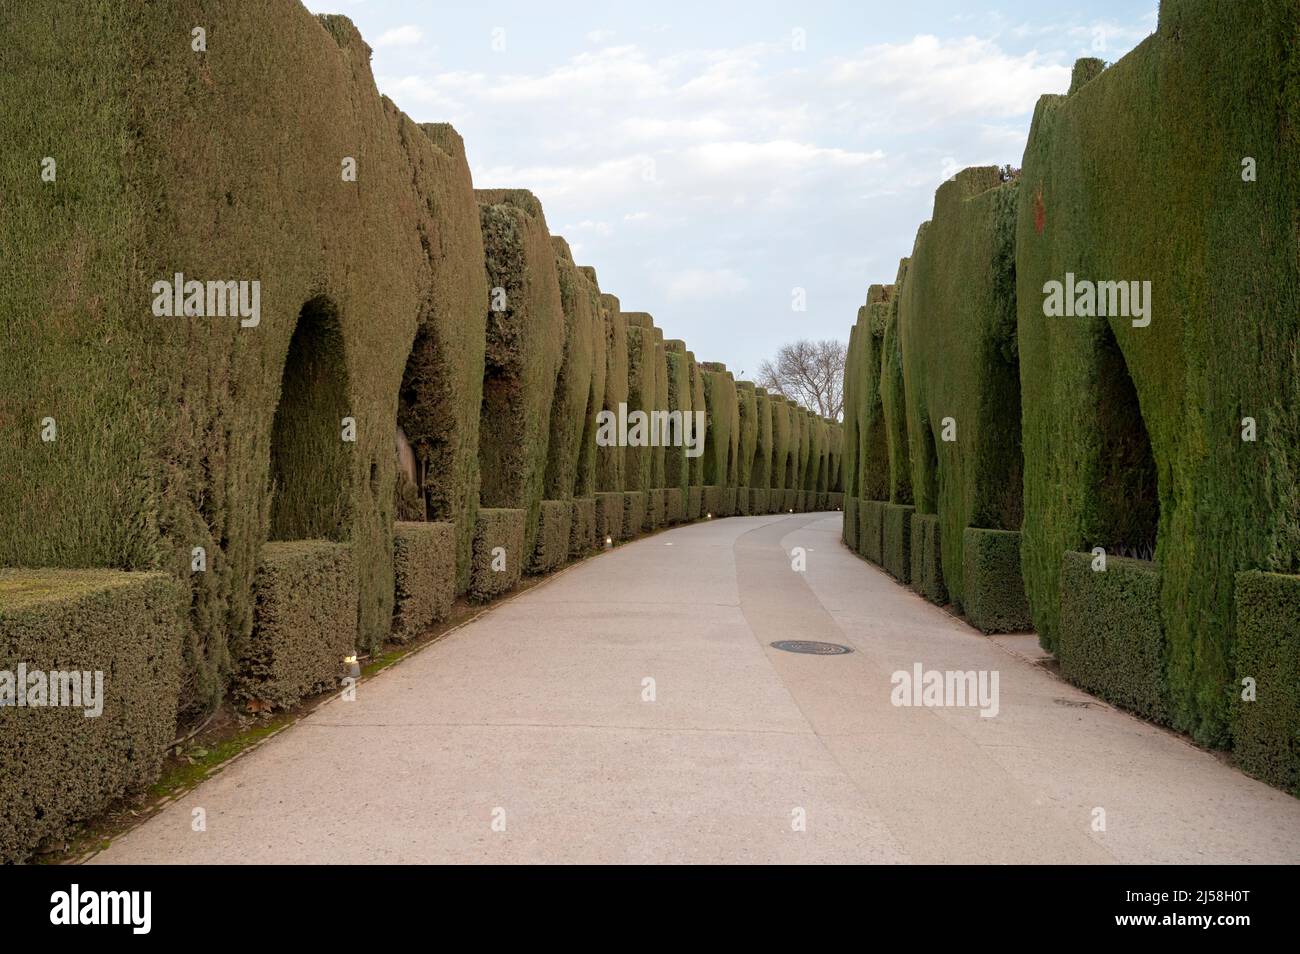 Mediterranean garden design with arches made from trimmed thuja coniferus trees Stock Photo